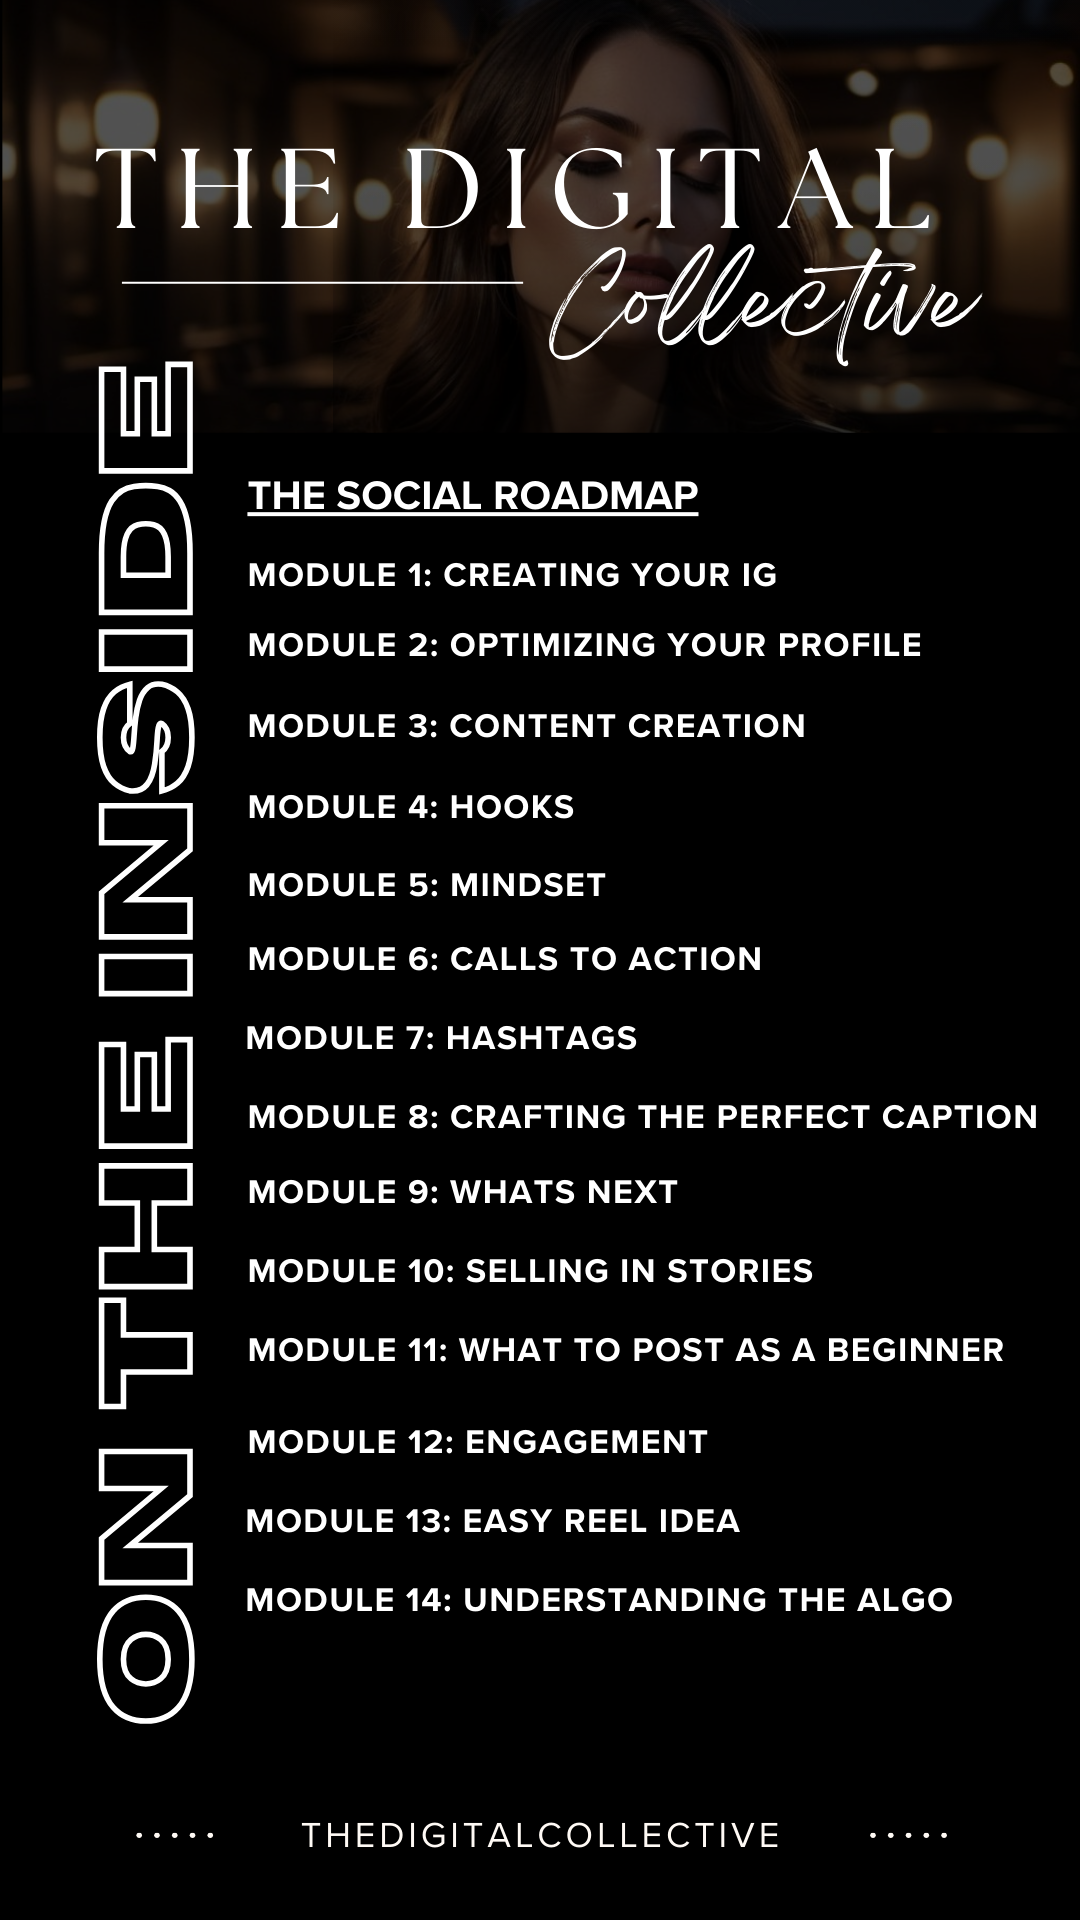 social roadmap course modules what is inside